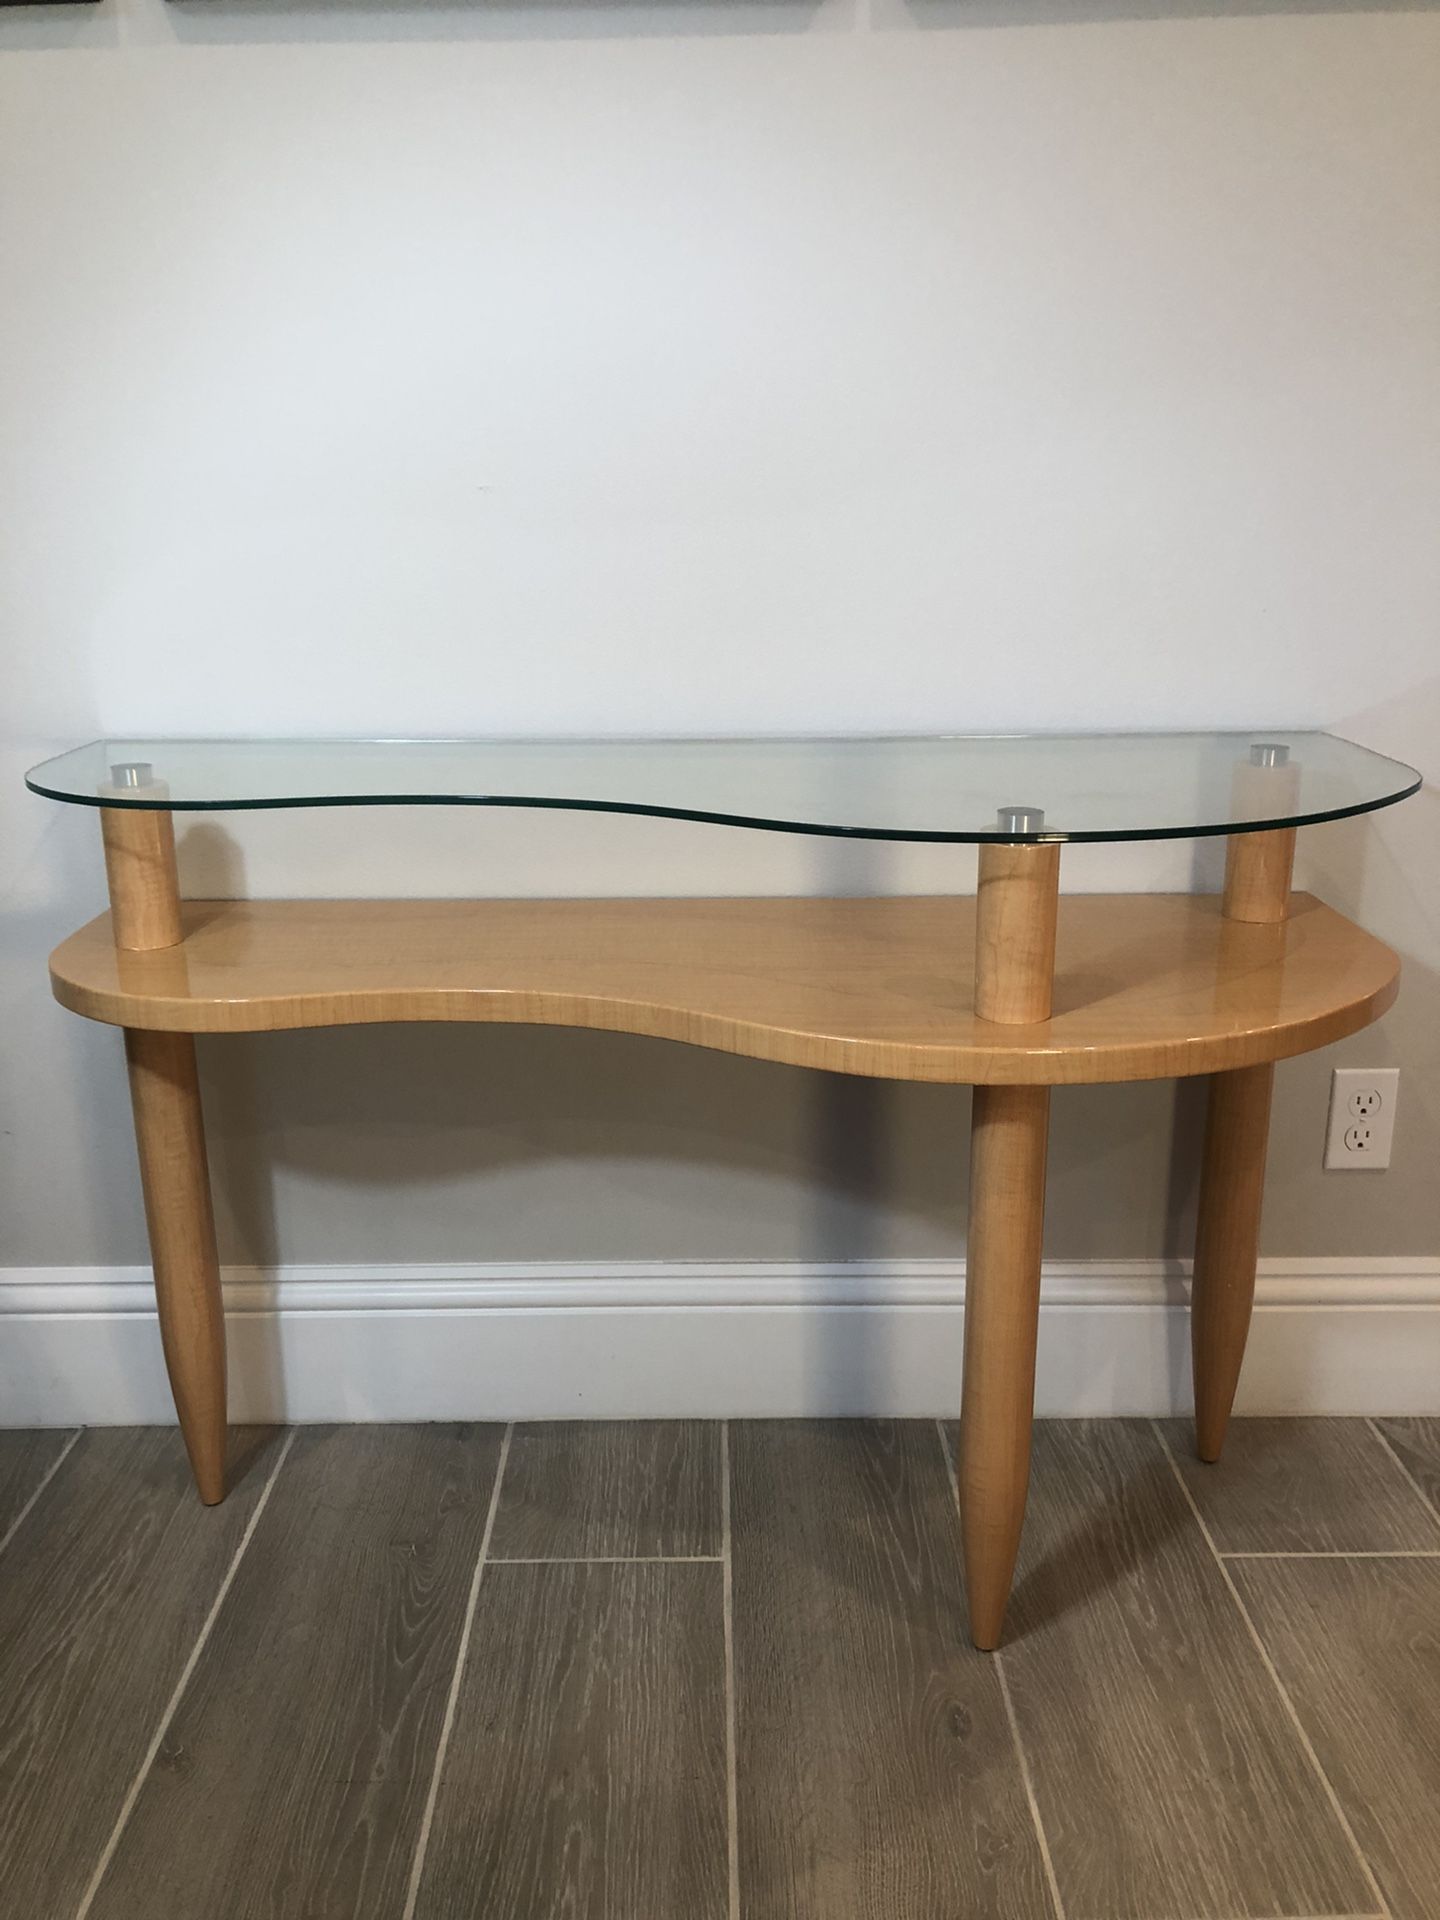 MCM Inspired Console Table in the Style of Gilbert Rohde for Herman Miller